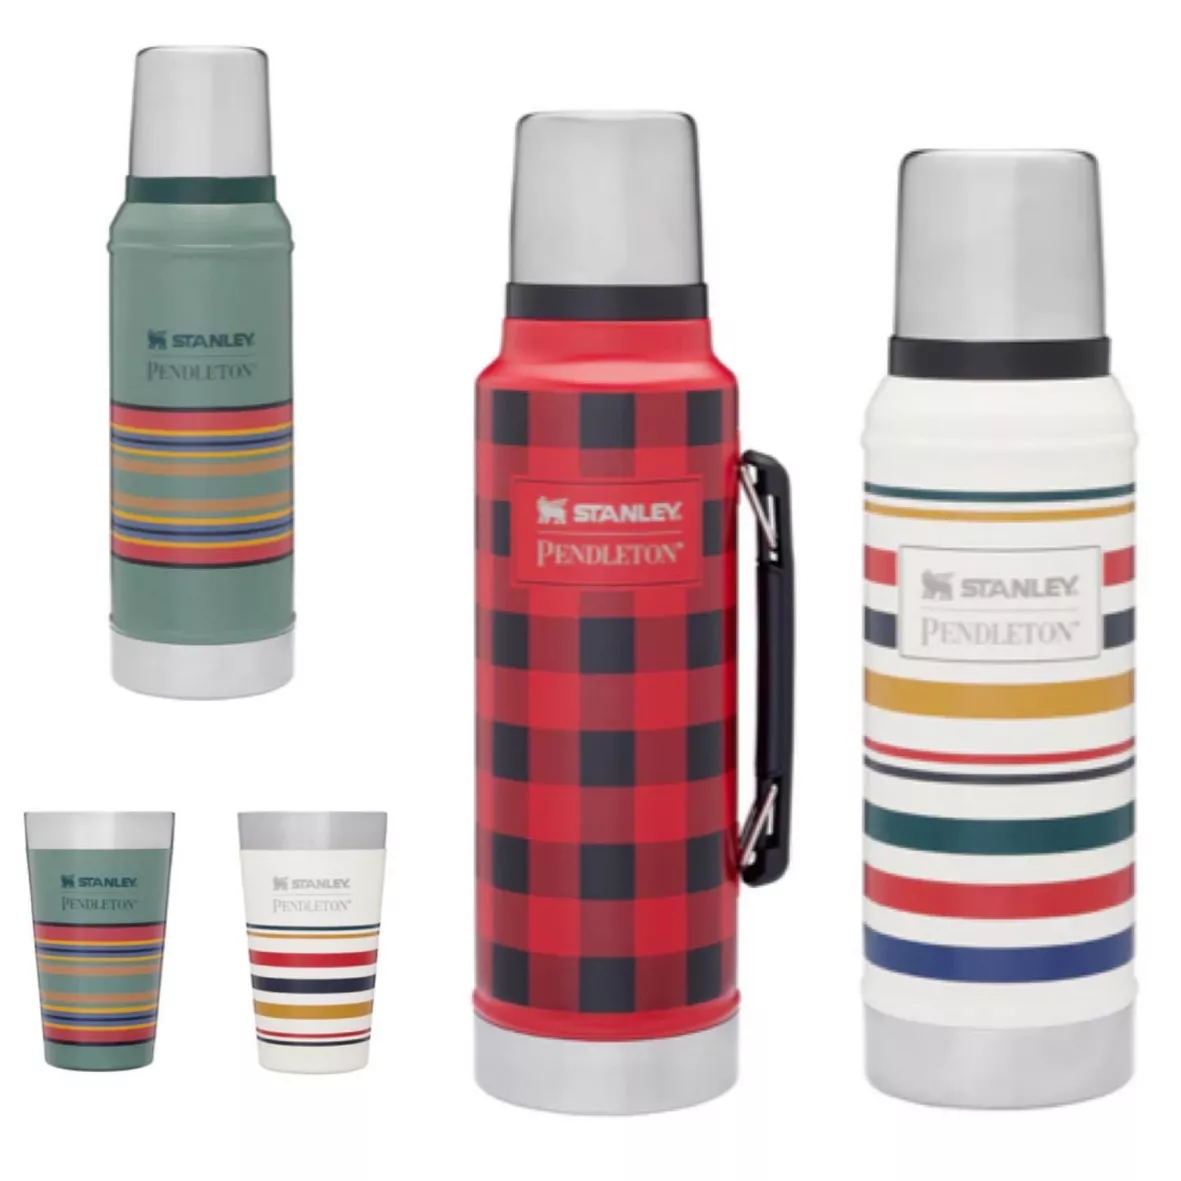 Stanley x Pendleton Classic Bottle curated on LTK